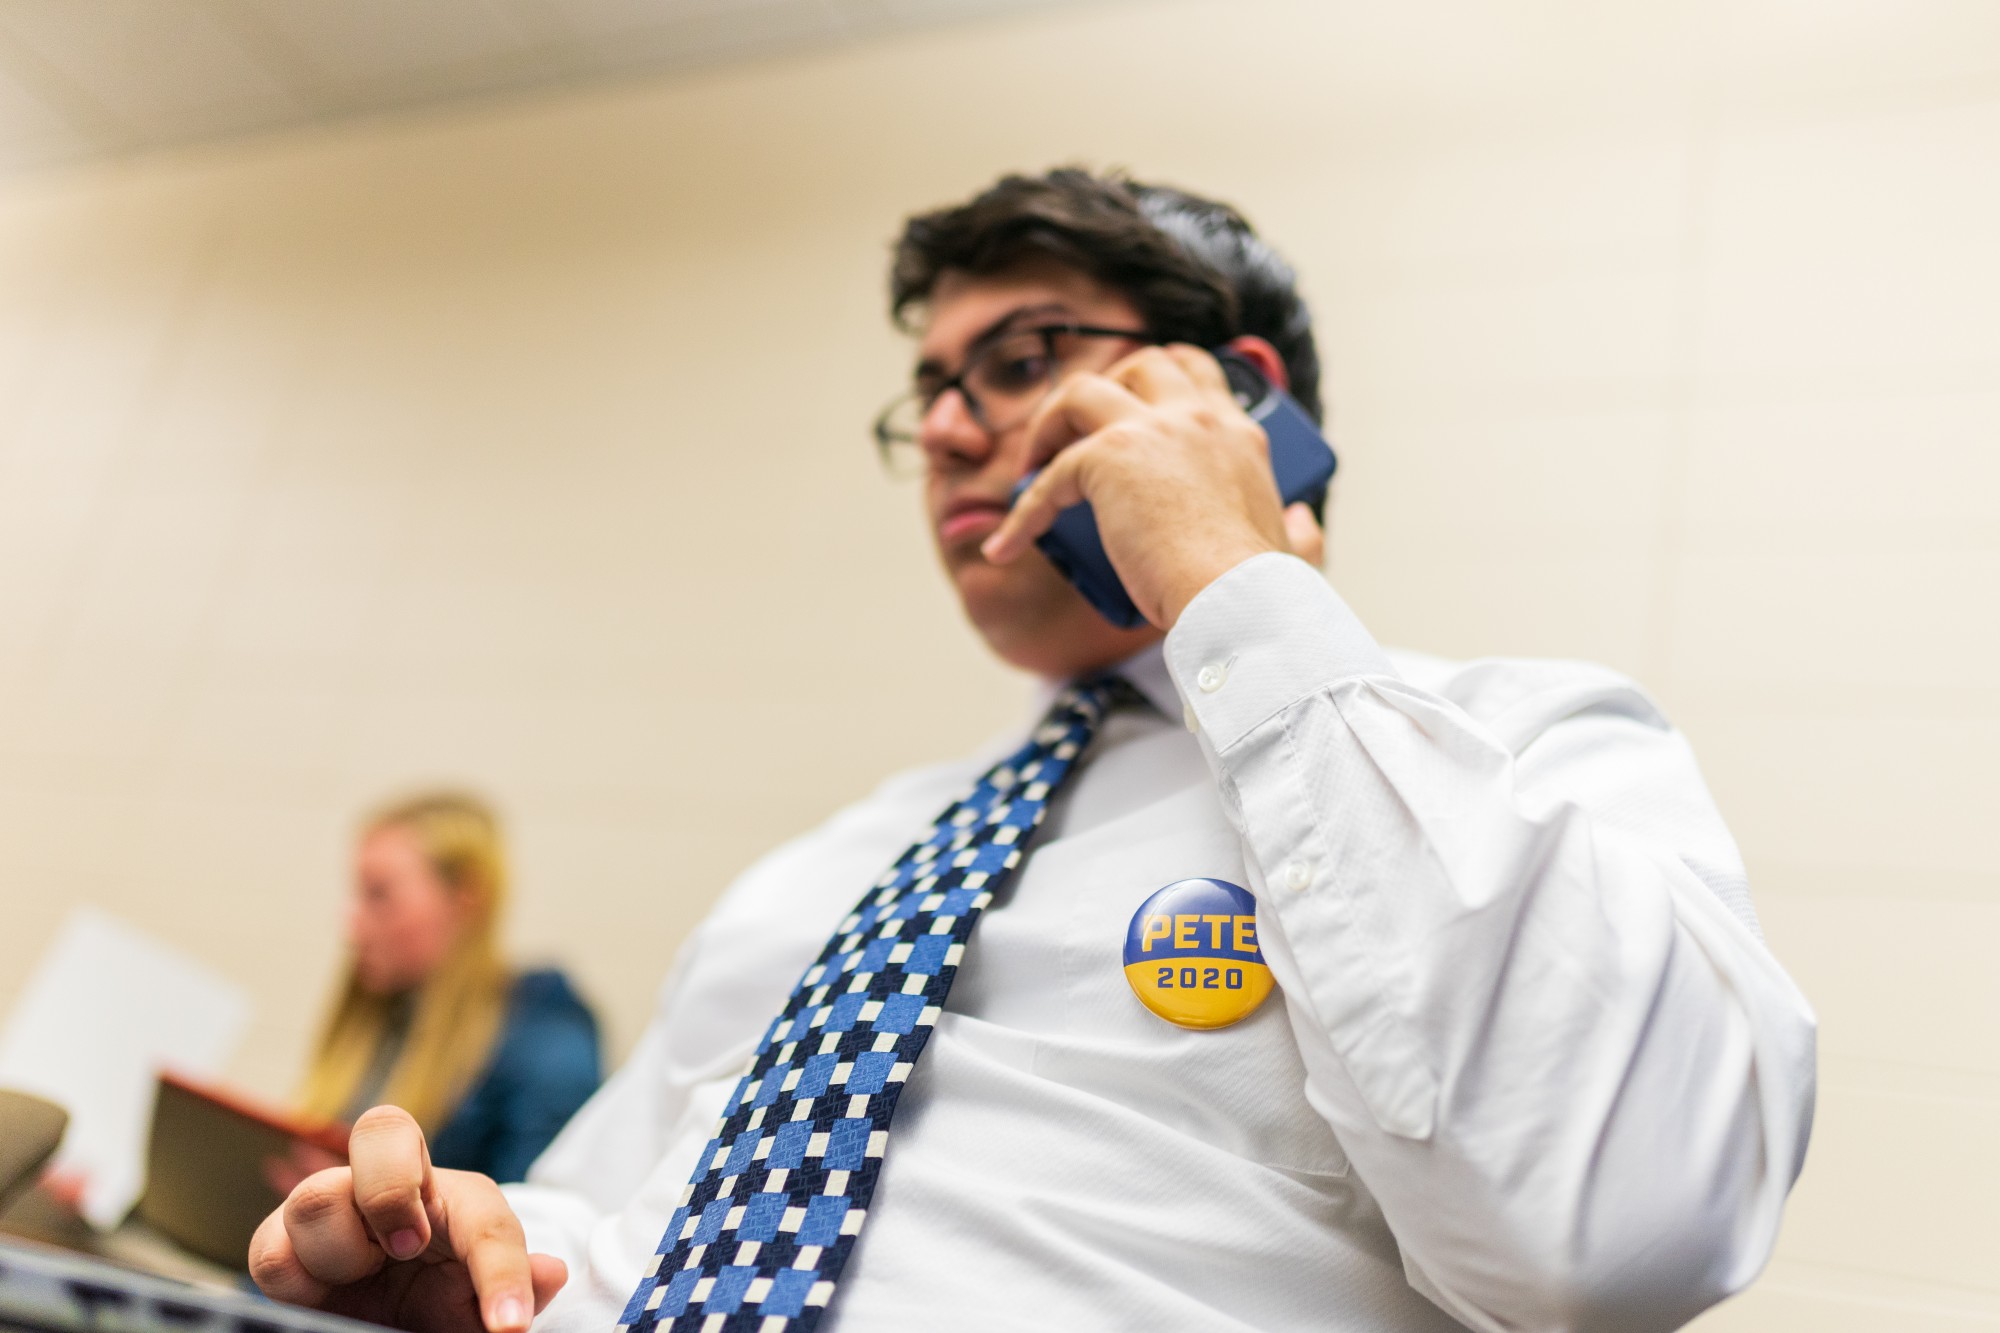 Phone bank organizer Jack Sewpersaud makes a call hoping to discuss the upcoming Super Tuesday primary and garner support for Democratic presidential candidate Pete Buttigieg at a phone banking effort in Blegen Hall on Friday, Feb. 28.